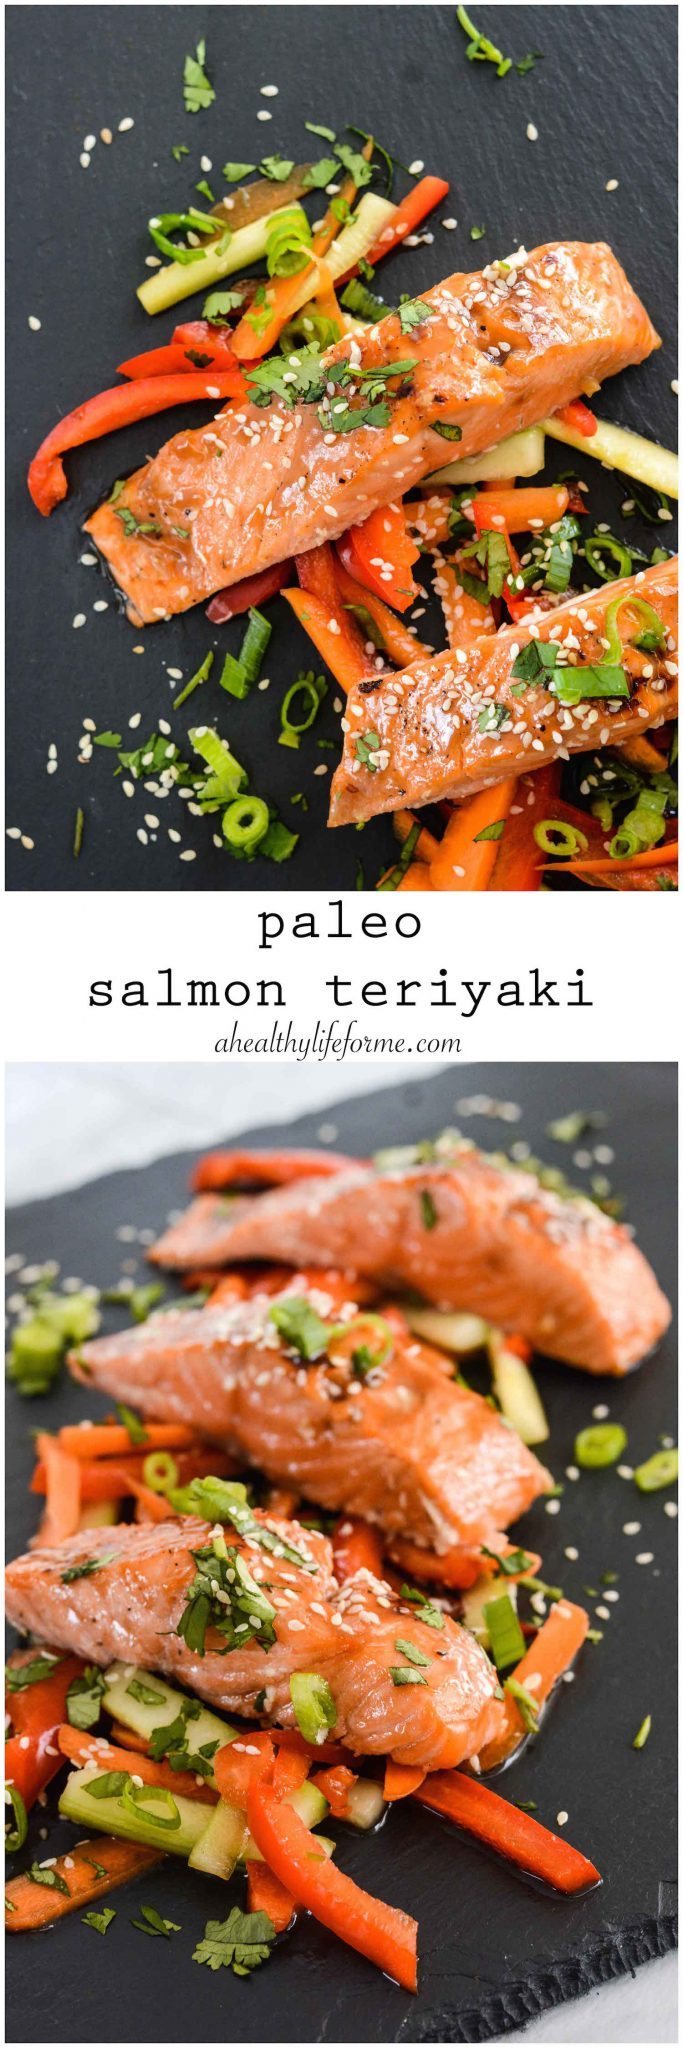 Paleo Salmon Teriyaki gluten free and dairy free healthy easy and ready in under 30 minutes | ahealhtylifeforme.com